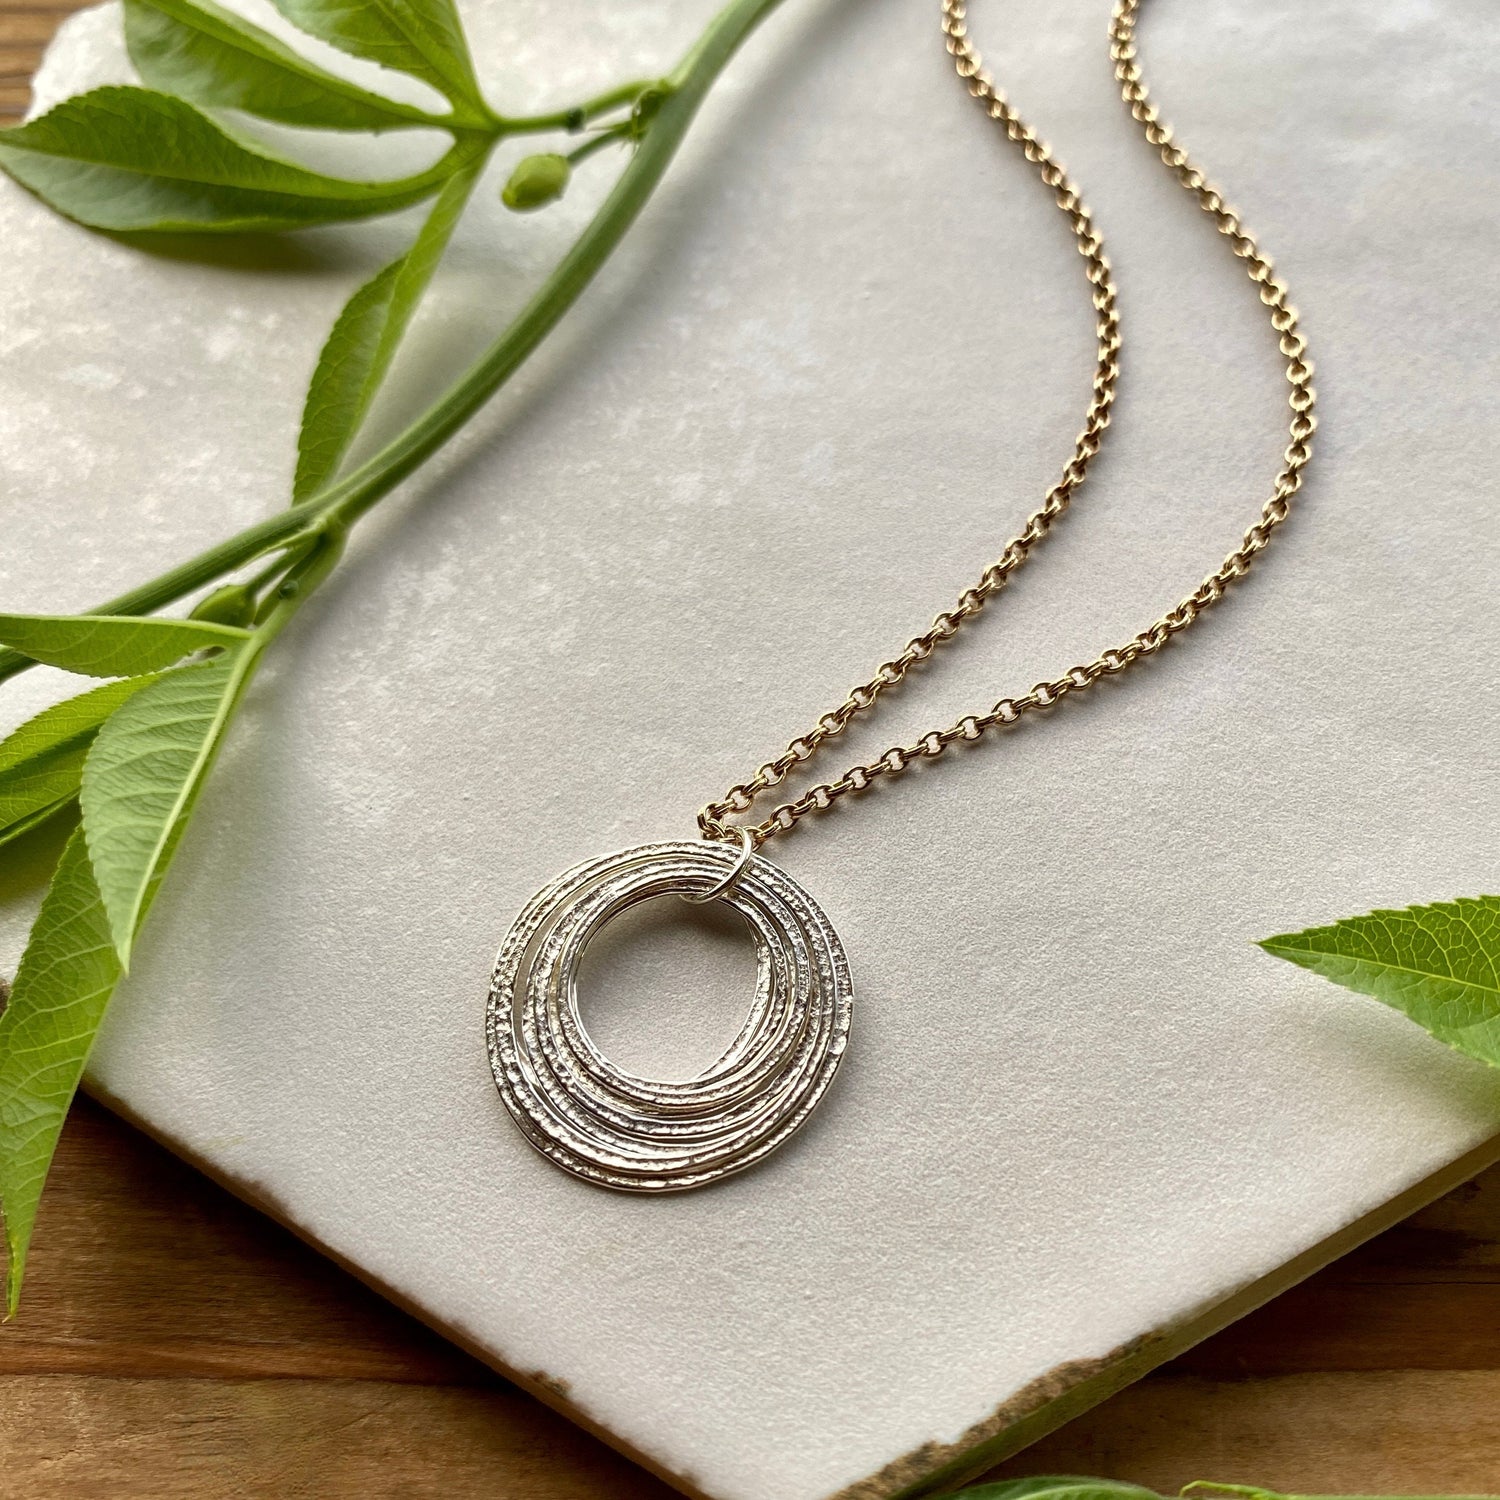 8 Circle 80th Minimalist Mixed Metal Milestone Birthday Necklace, Seven Rings for 8 Decades Handcrafted Perfectly Imperfect 8 Circle Pendant